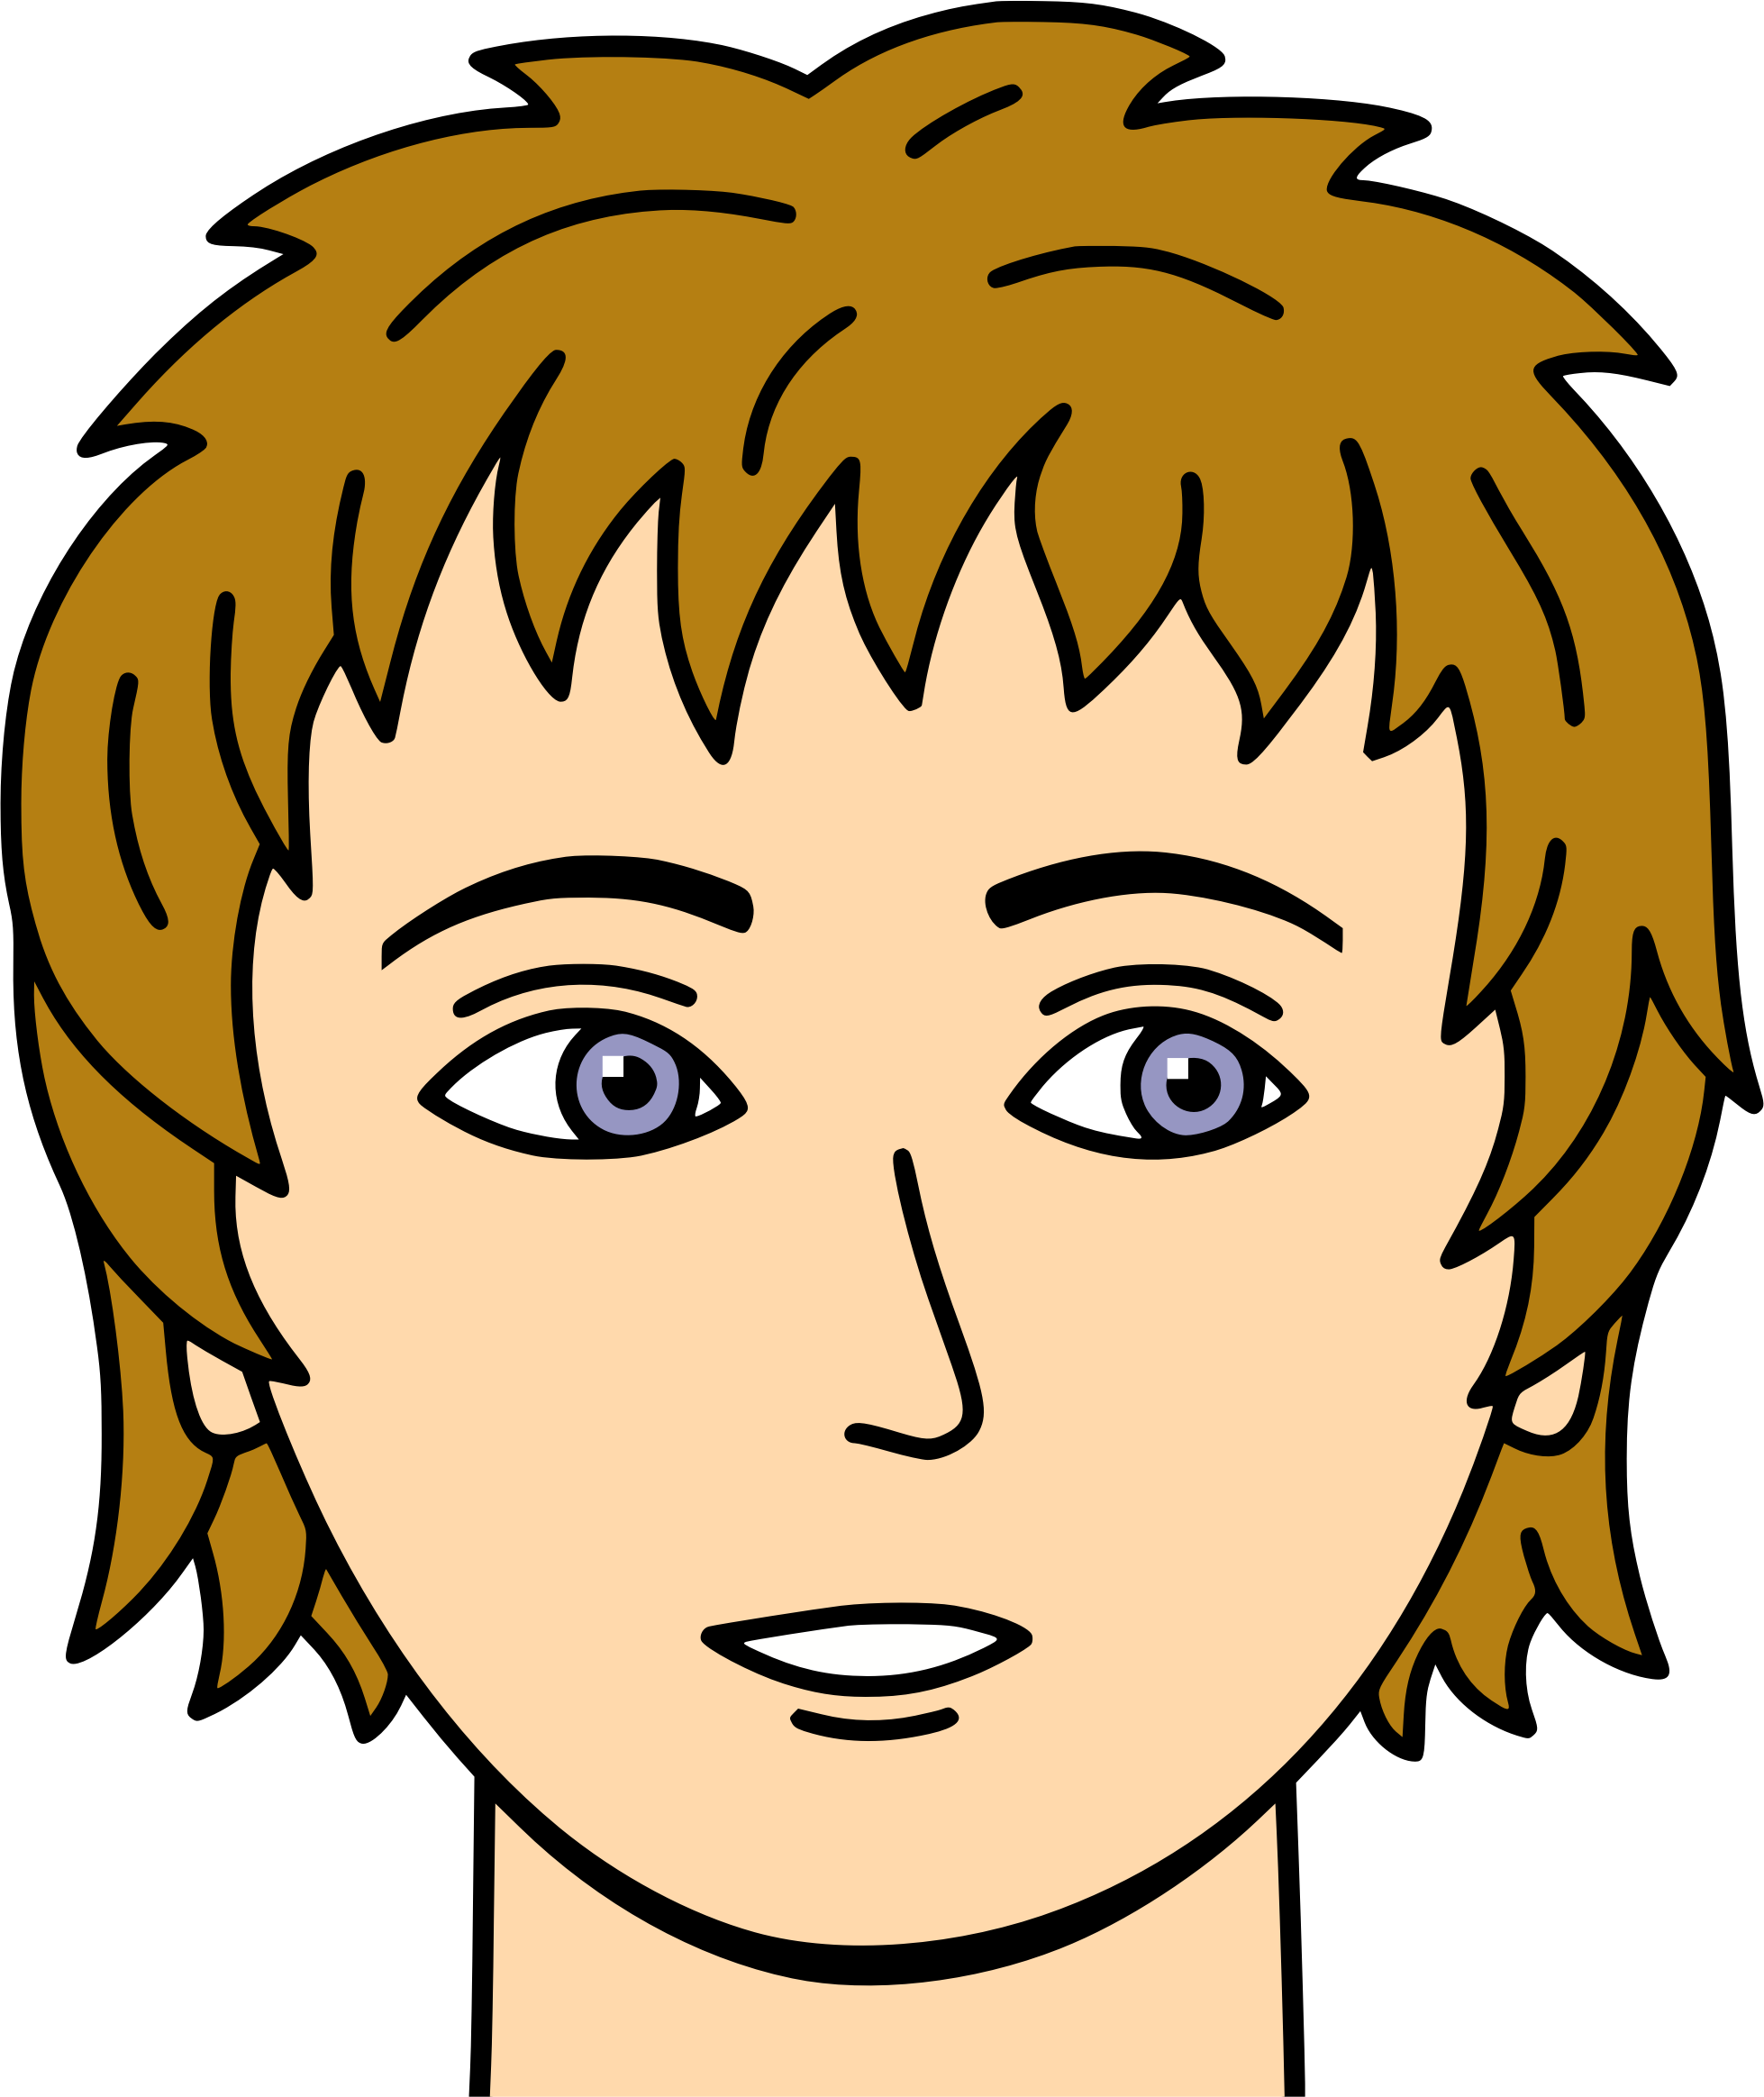 Number 1 clipart face, Number 1 face Transparent FREE for.